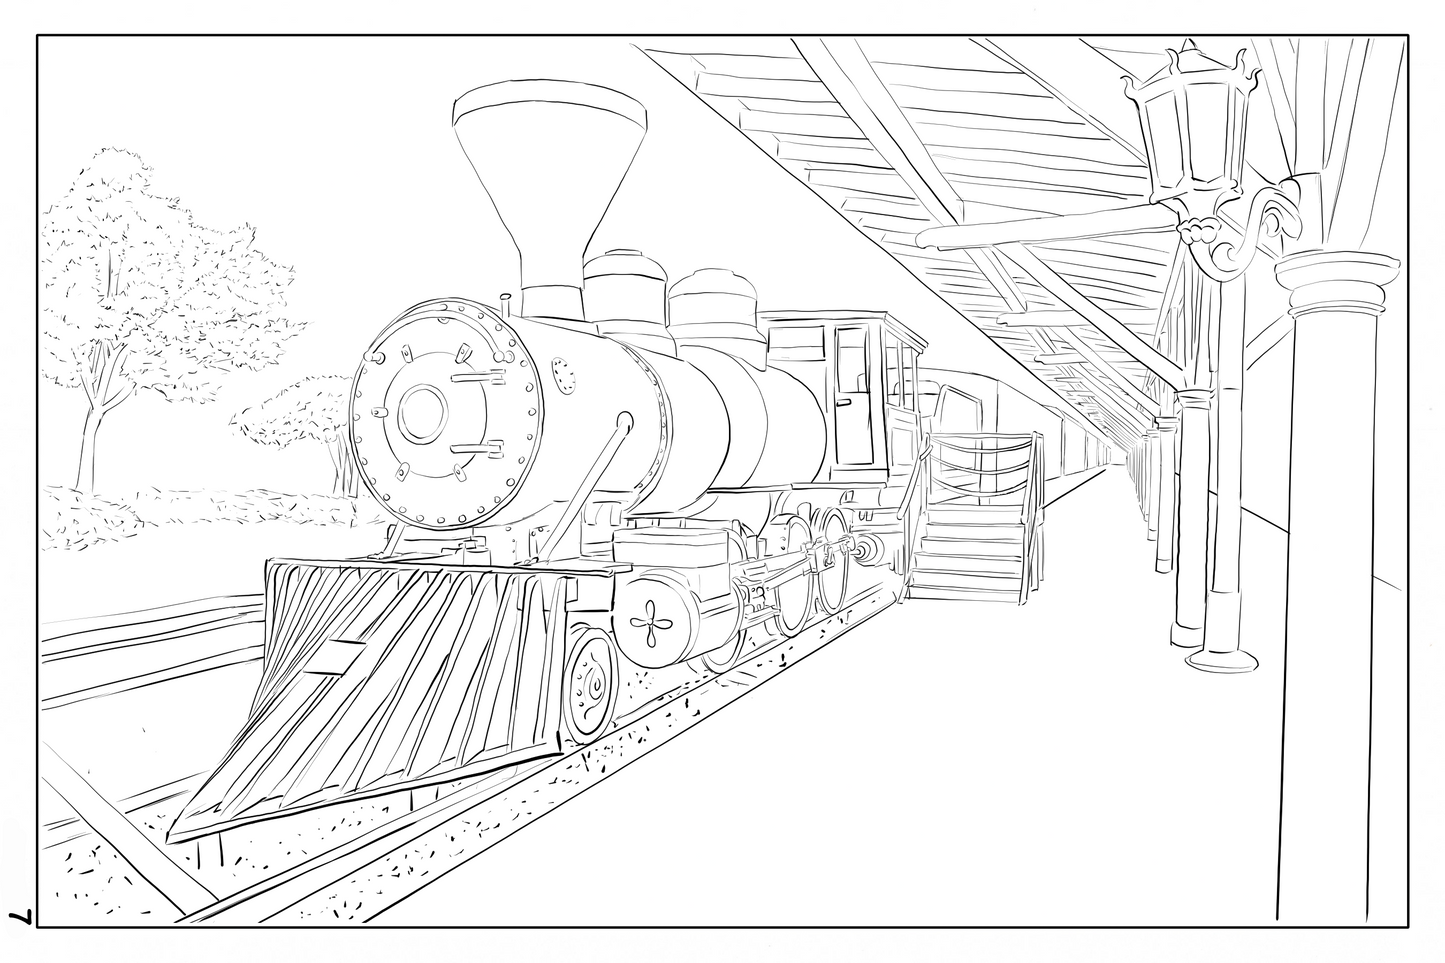 Watercolor Coloring Book page, Chattanooga Choo Choo, 140lbs cold pressed watercolor paper